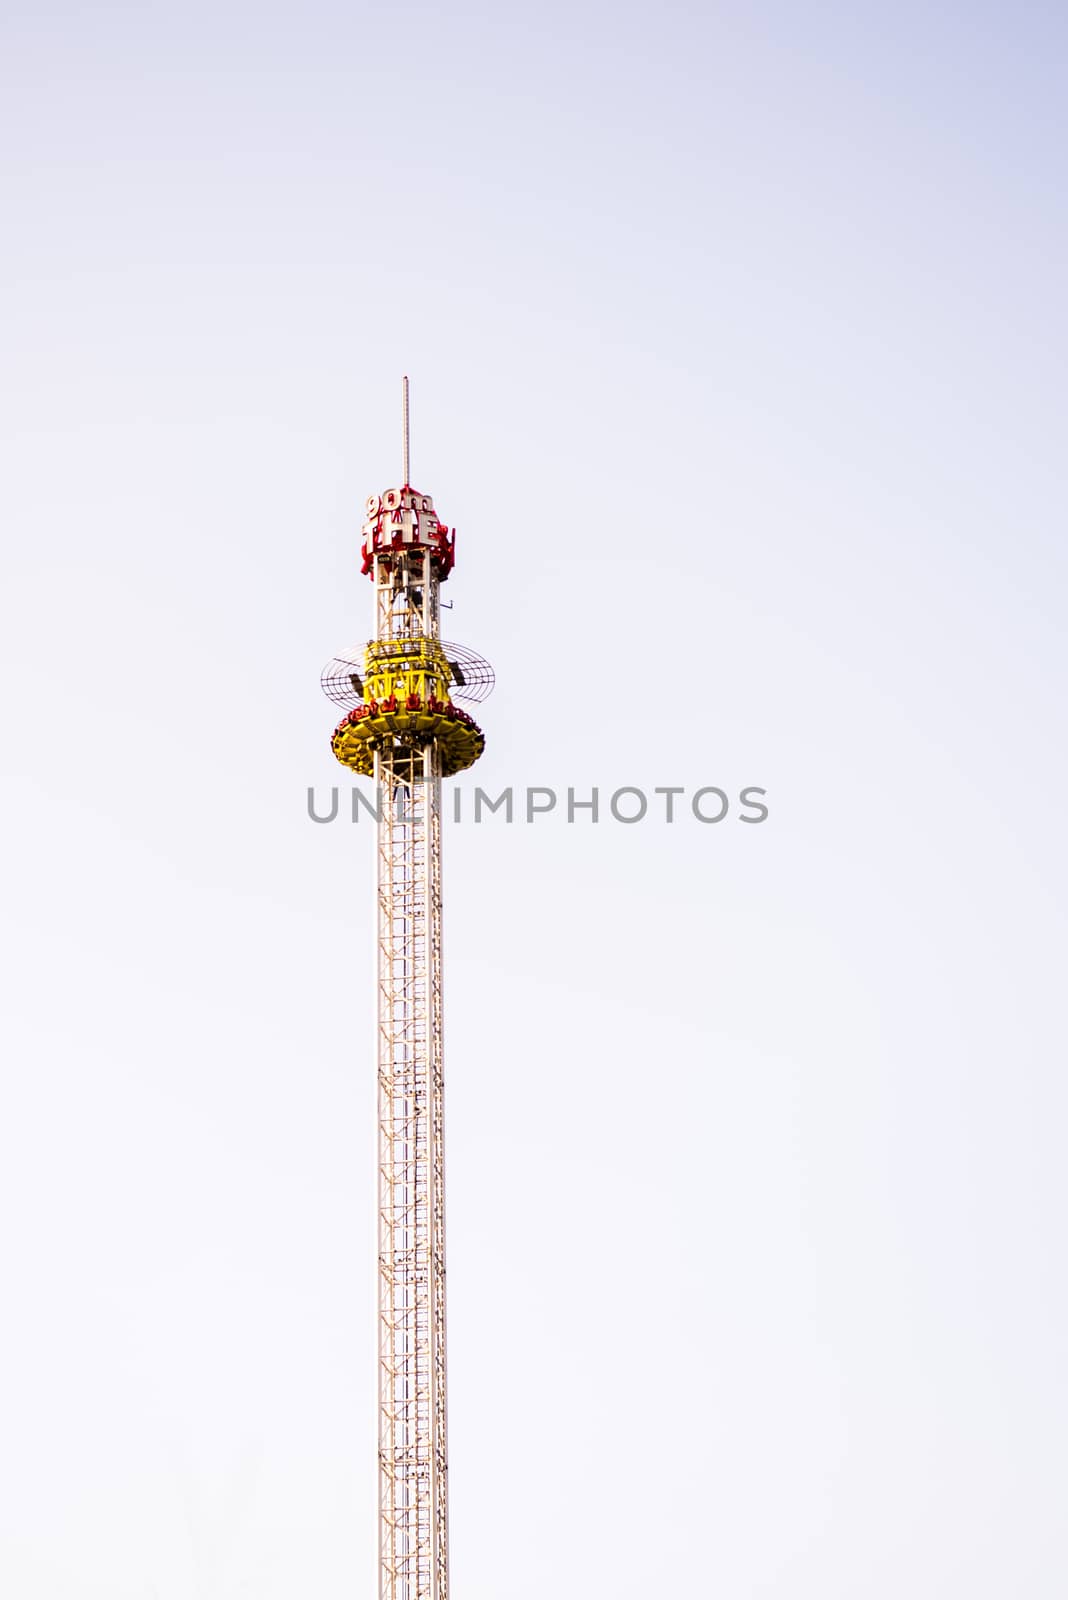 Amusement park ride, meerry go round, carousel ride on extremly high tower